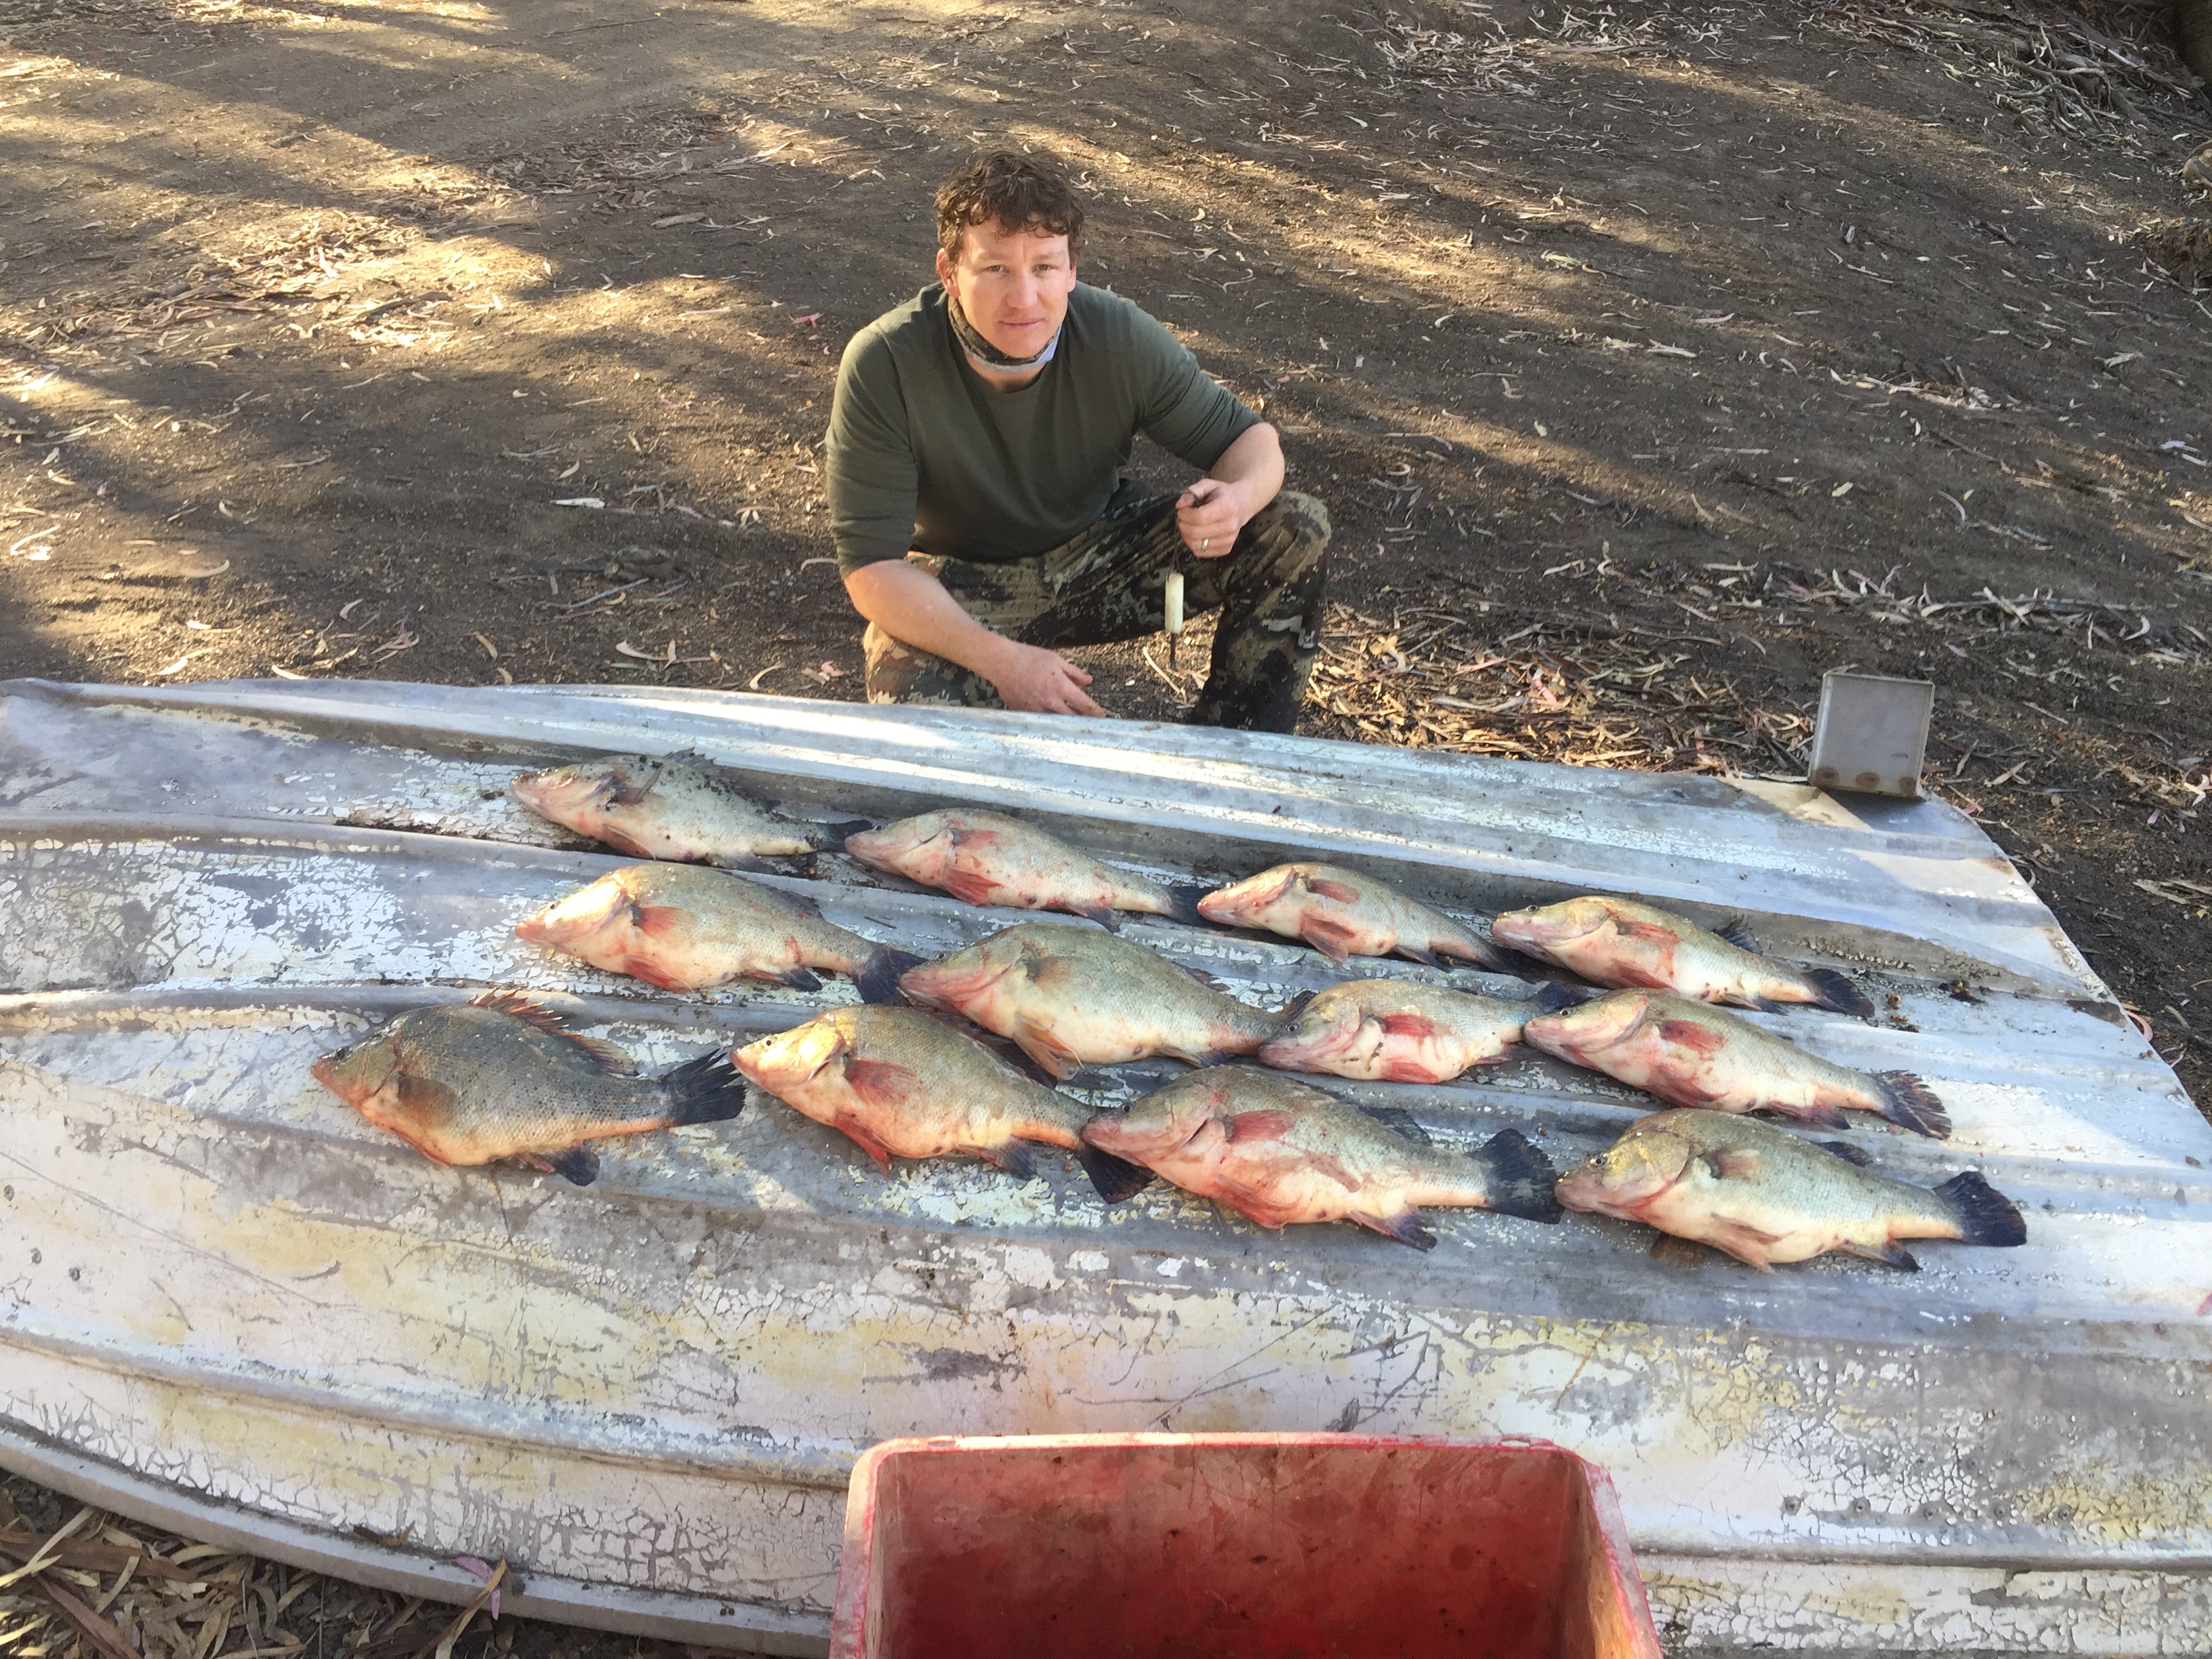 3.5m boat seized with 12 golden perch